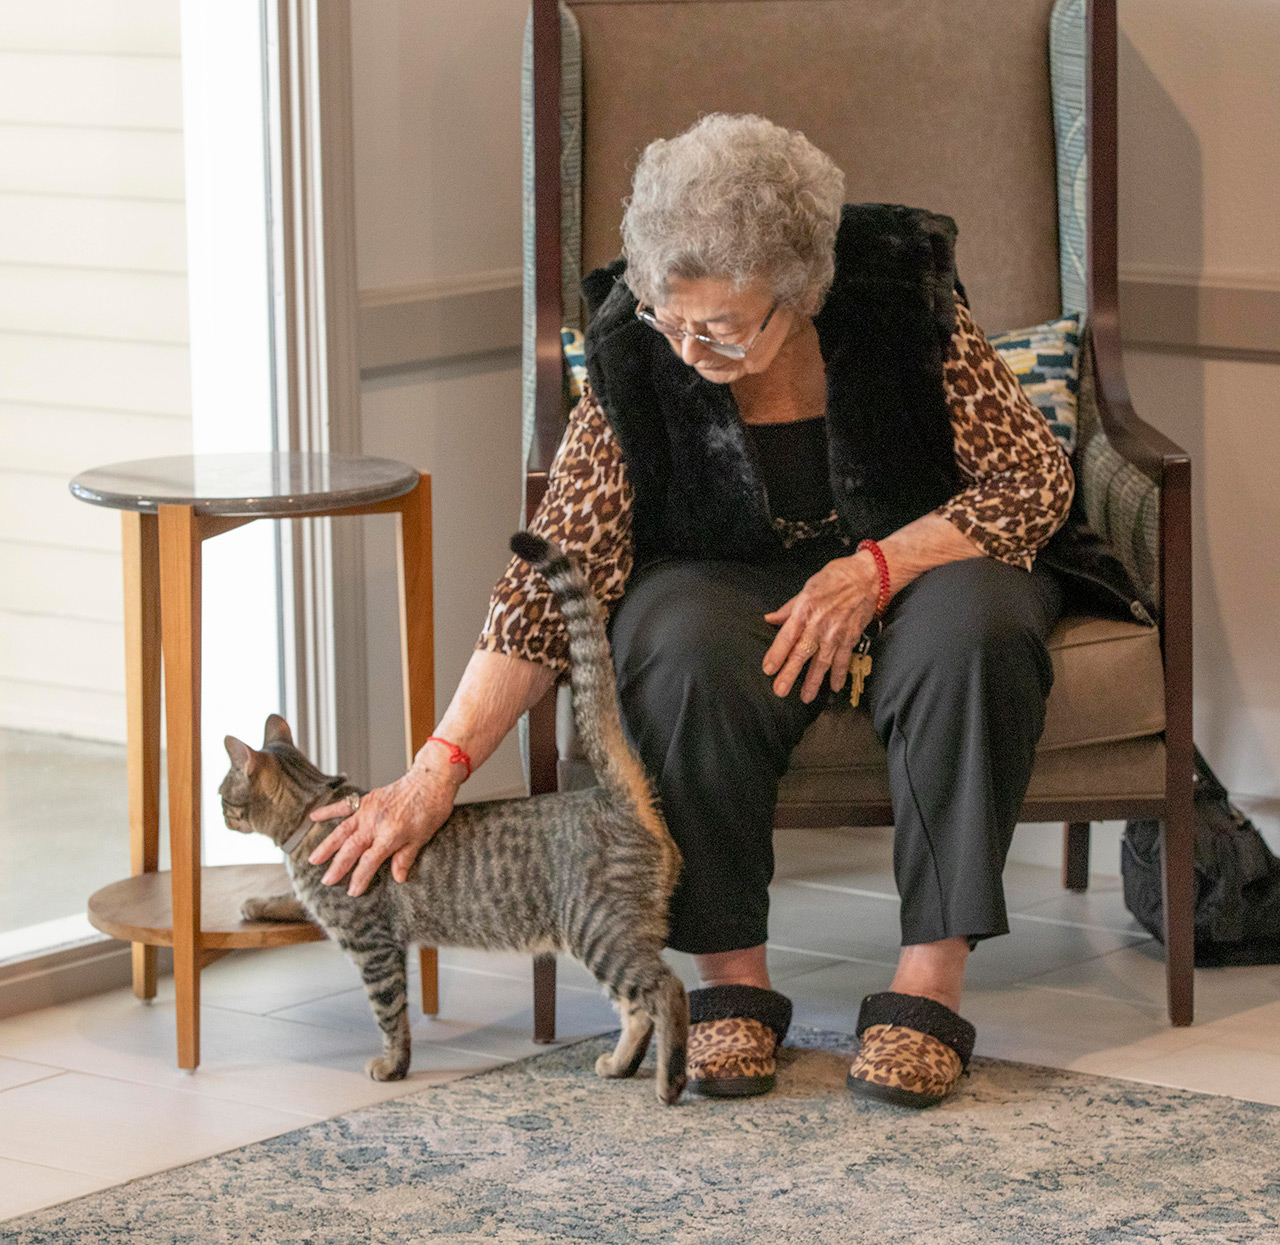 A resident is petting a cat.